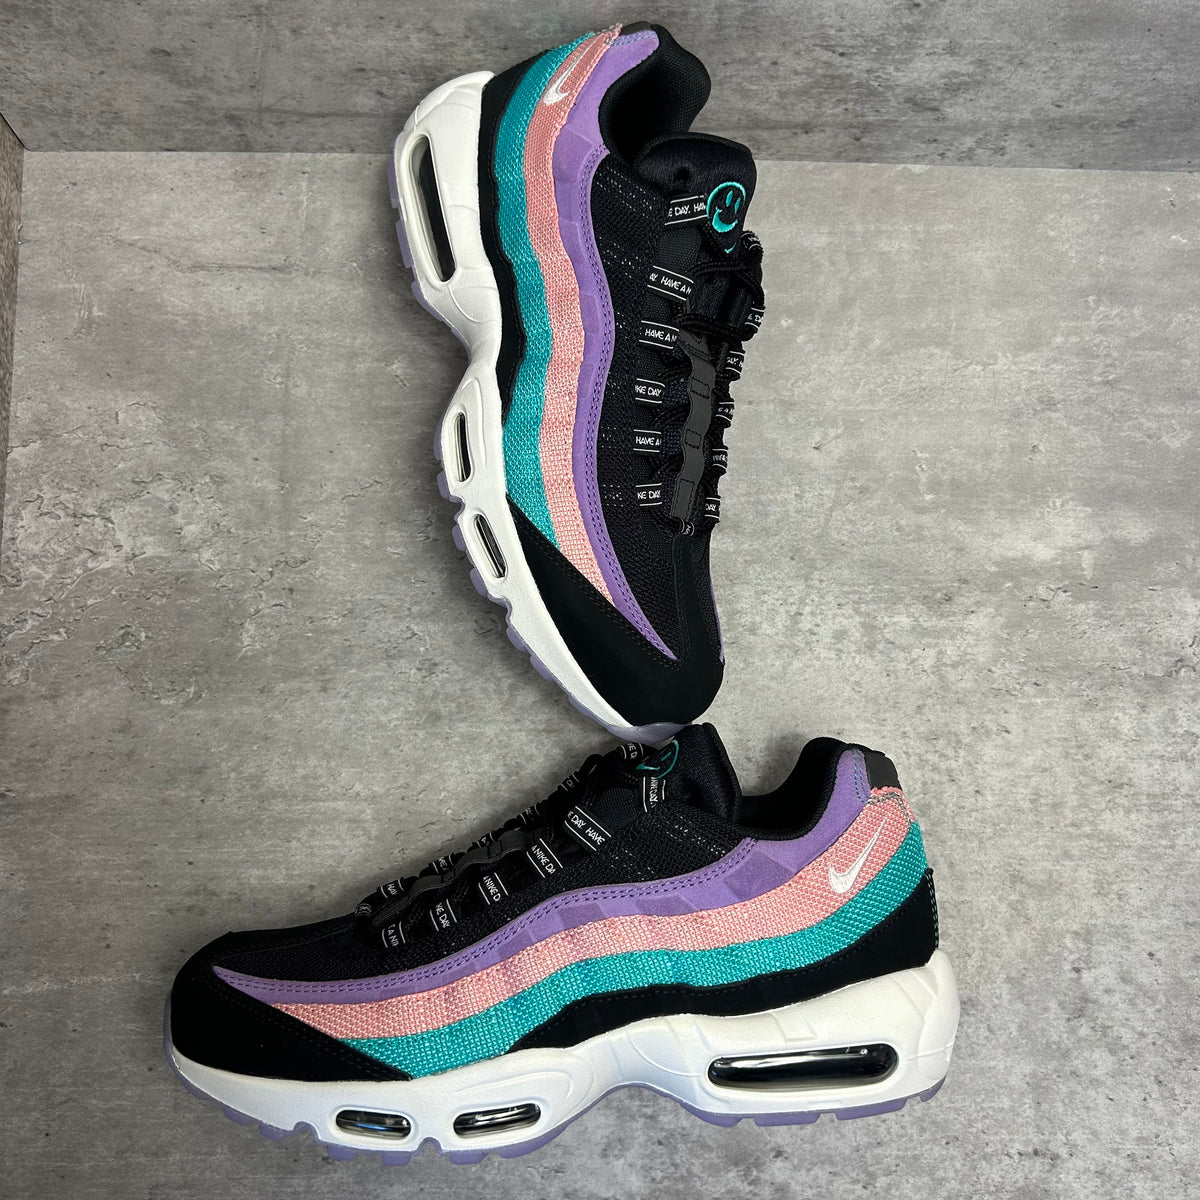 Nike Airmax 95 Have a Nike Day